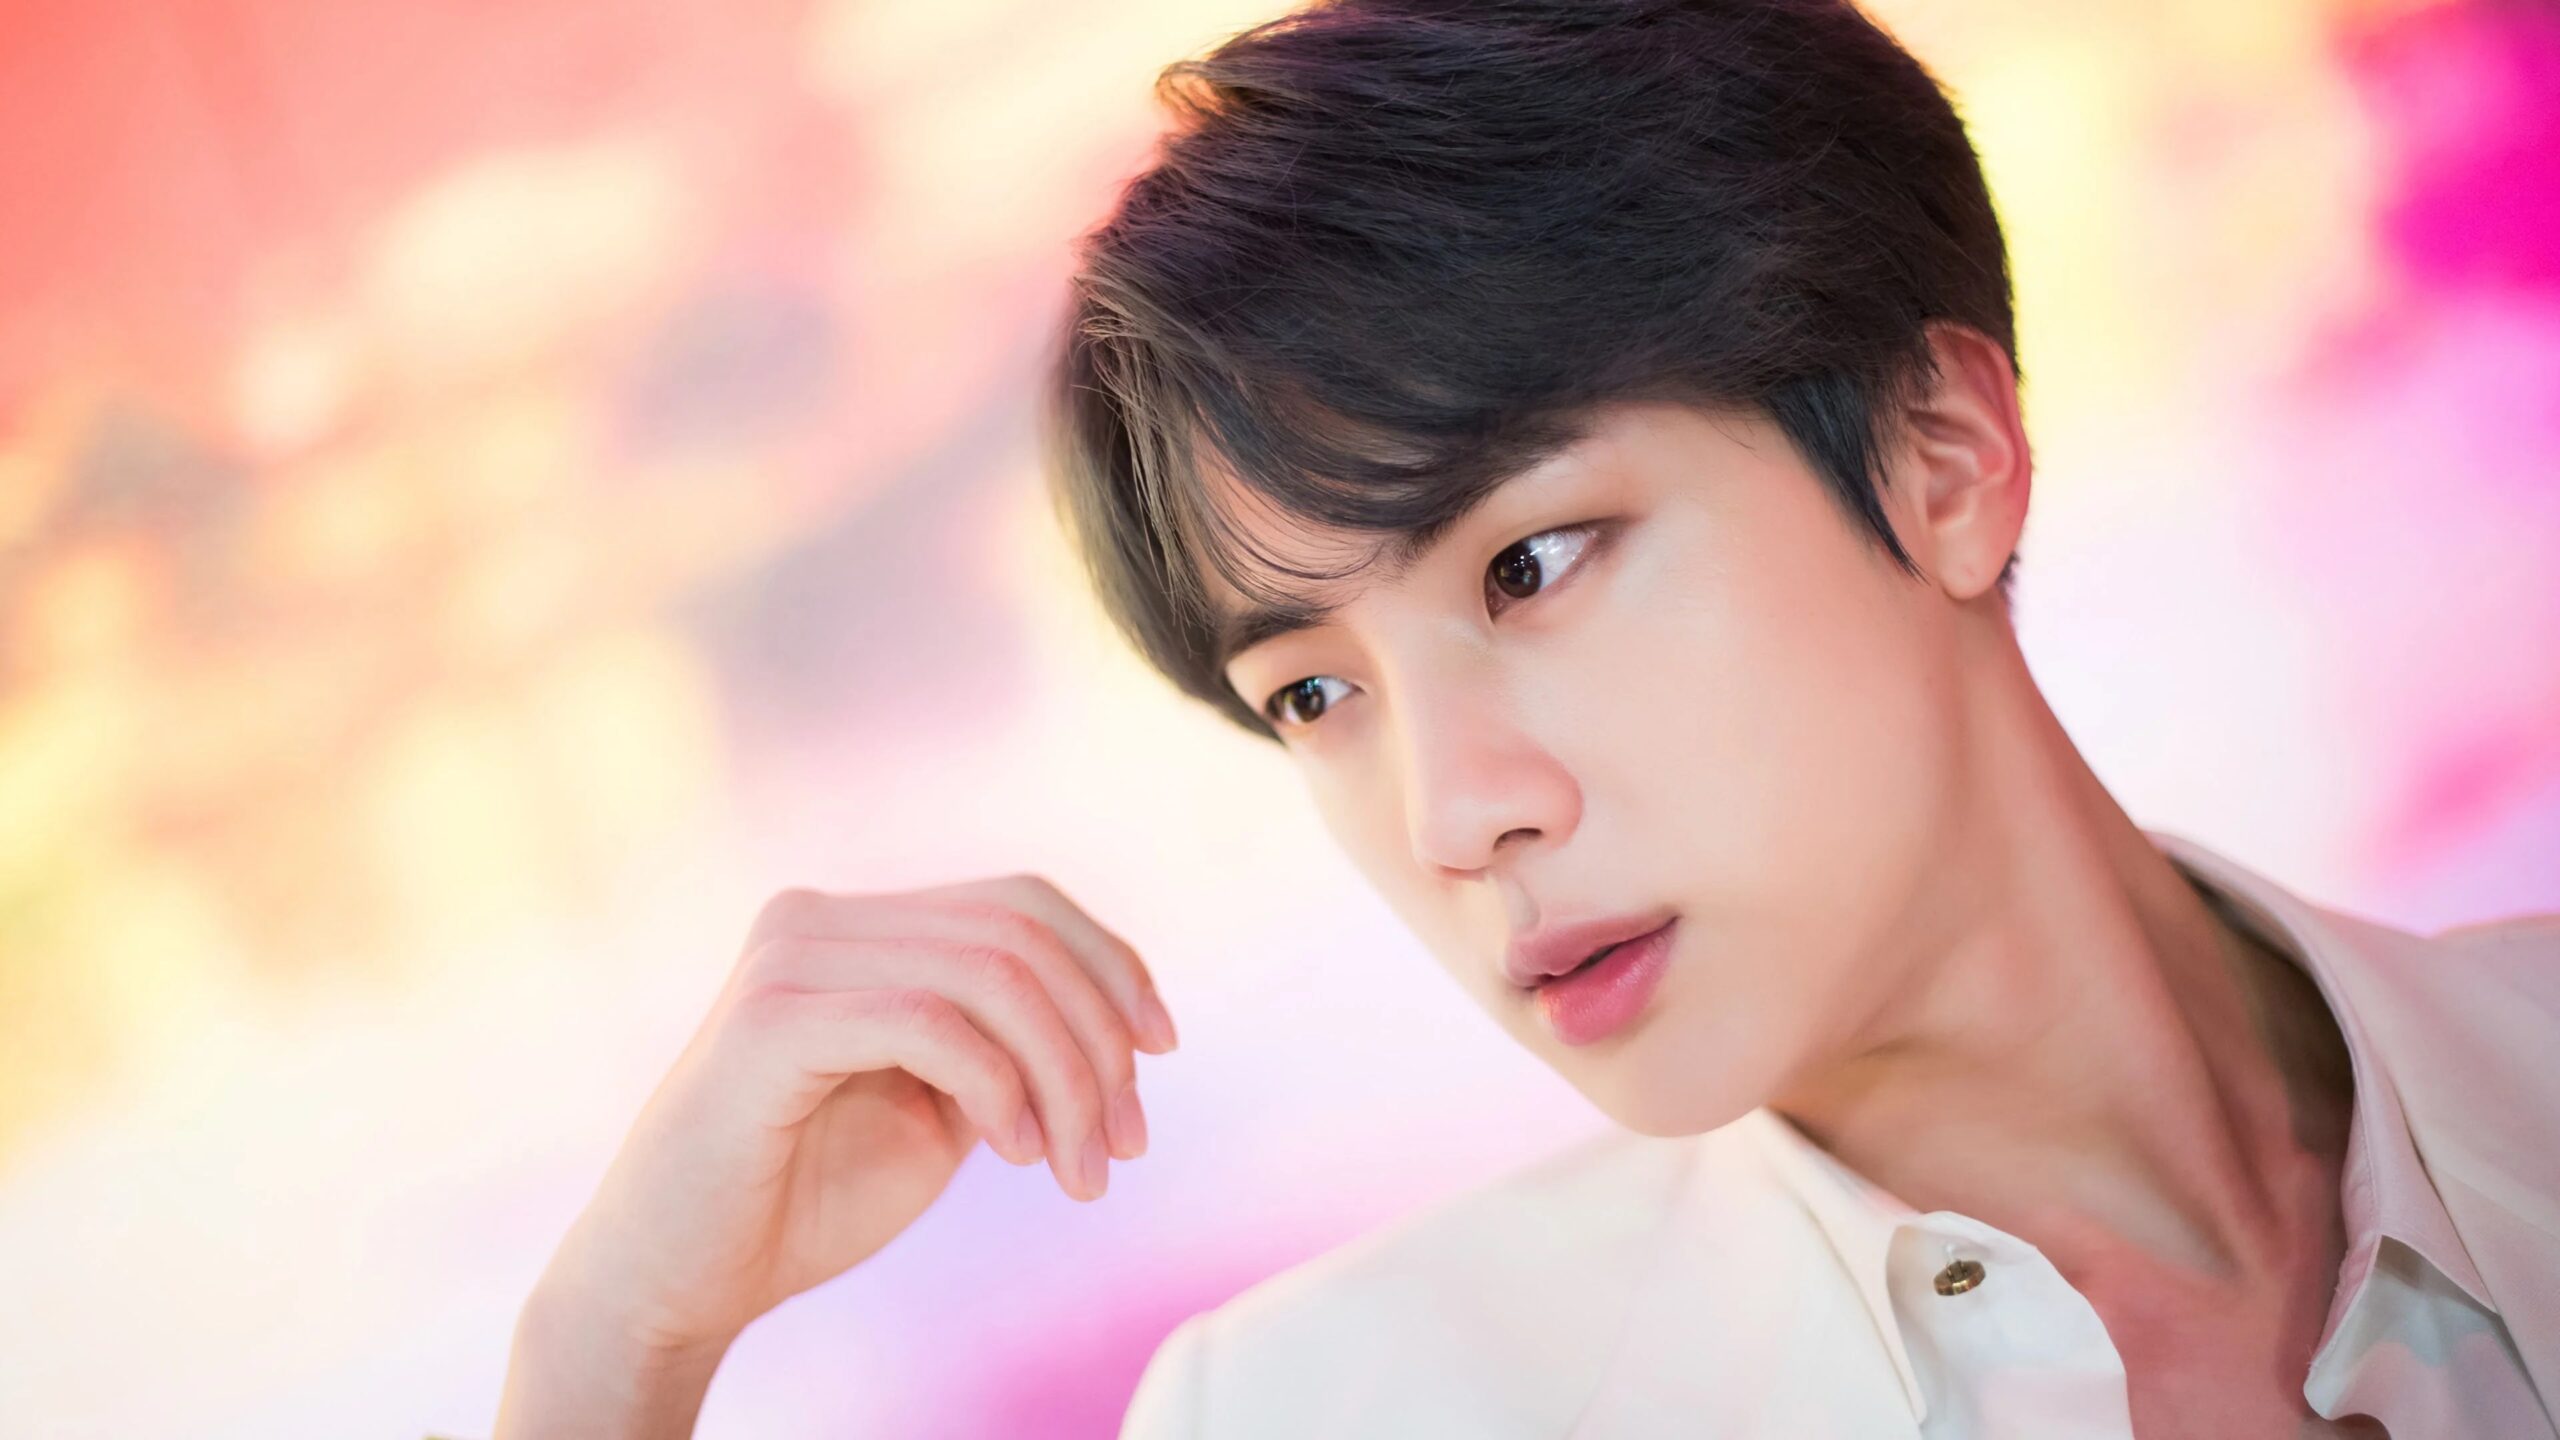 Jin joins the South Korean army: How many Kpop artists have enlisted in the military?